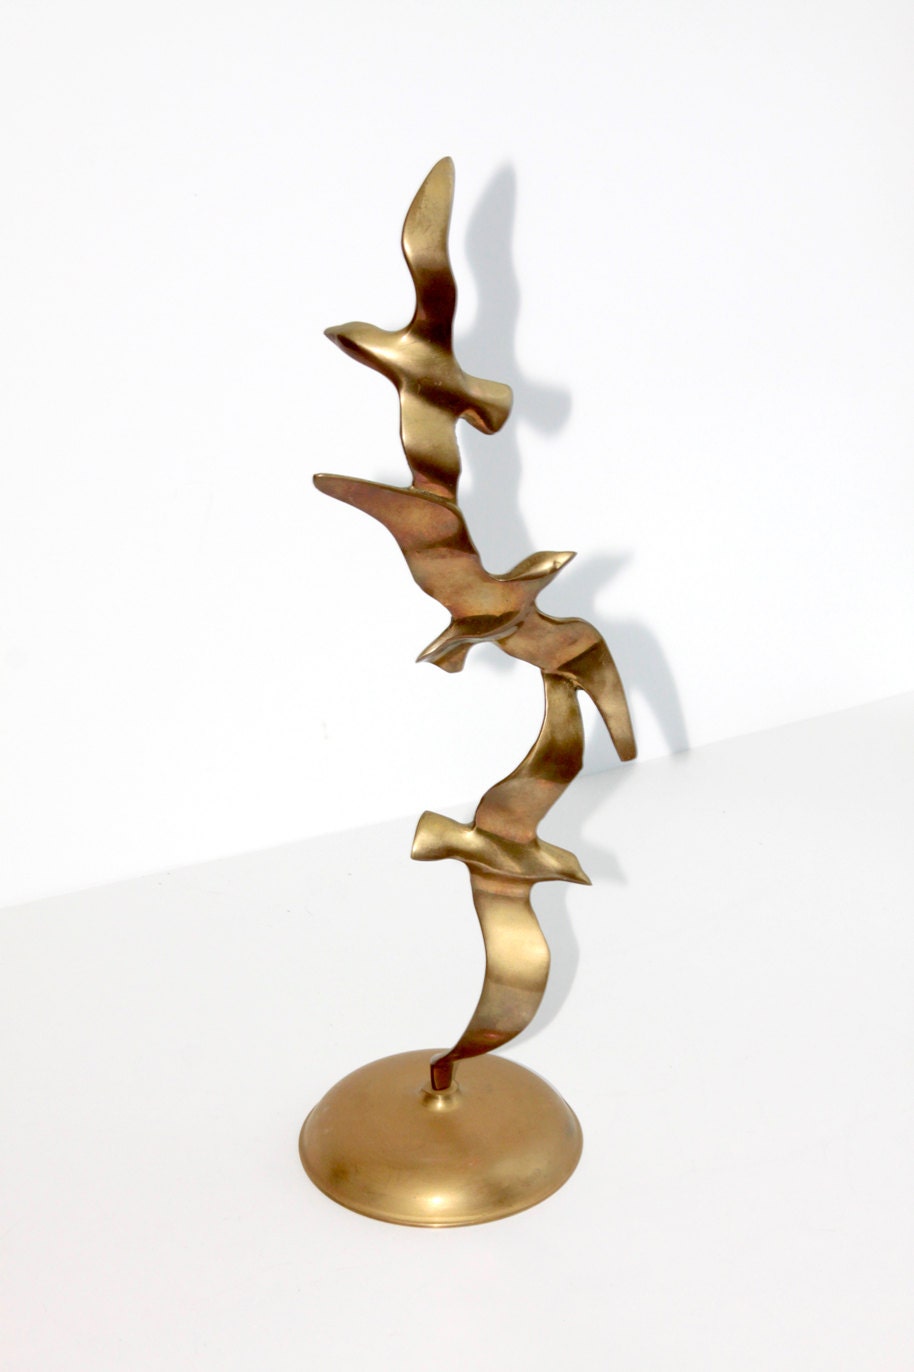 Retro Brass Seagull Sculpture made by Penco - Fleaosophy